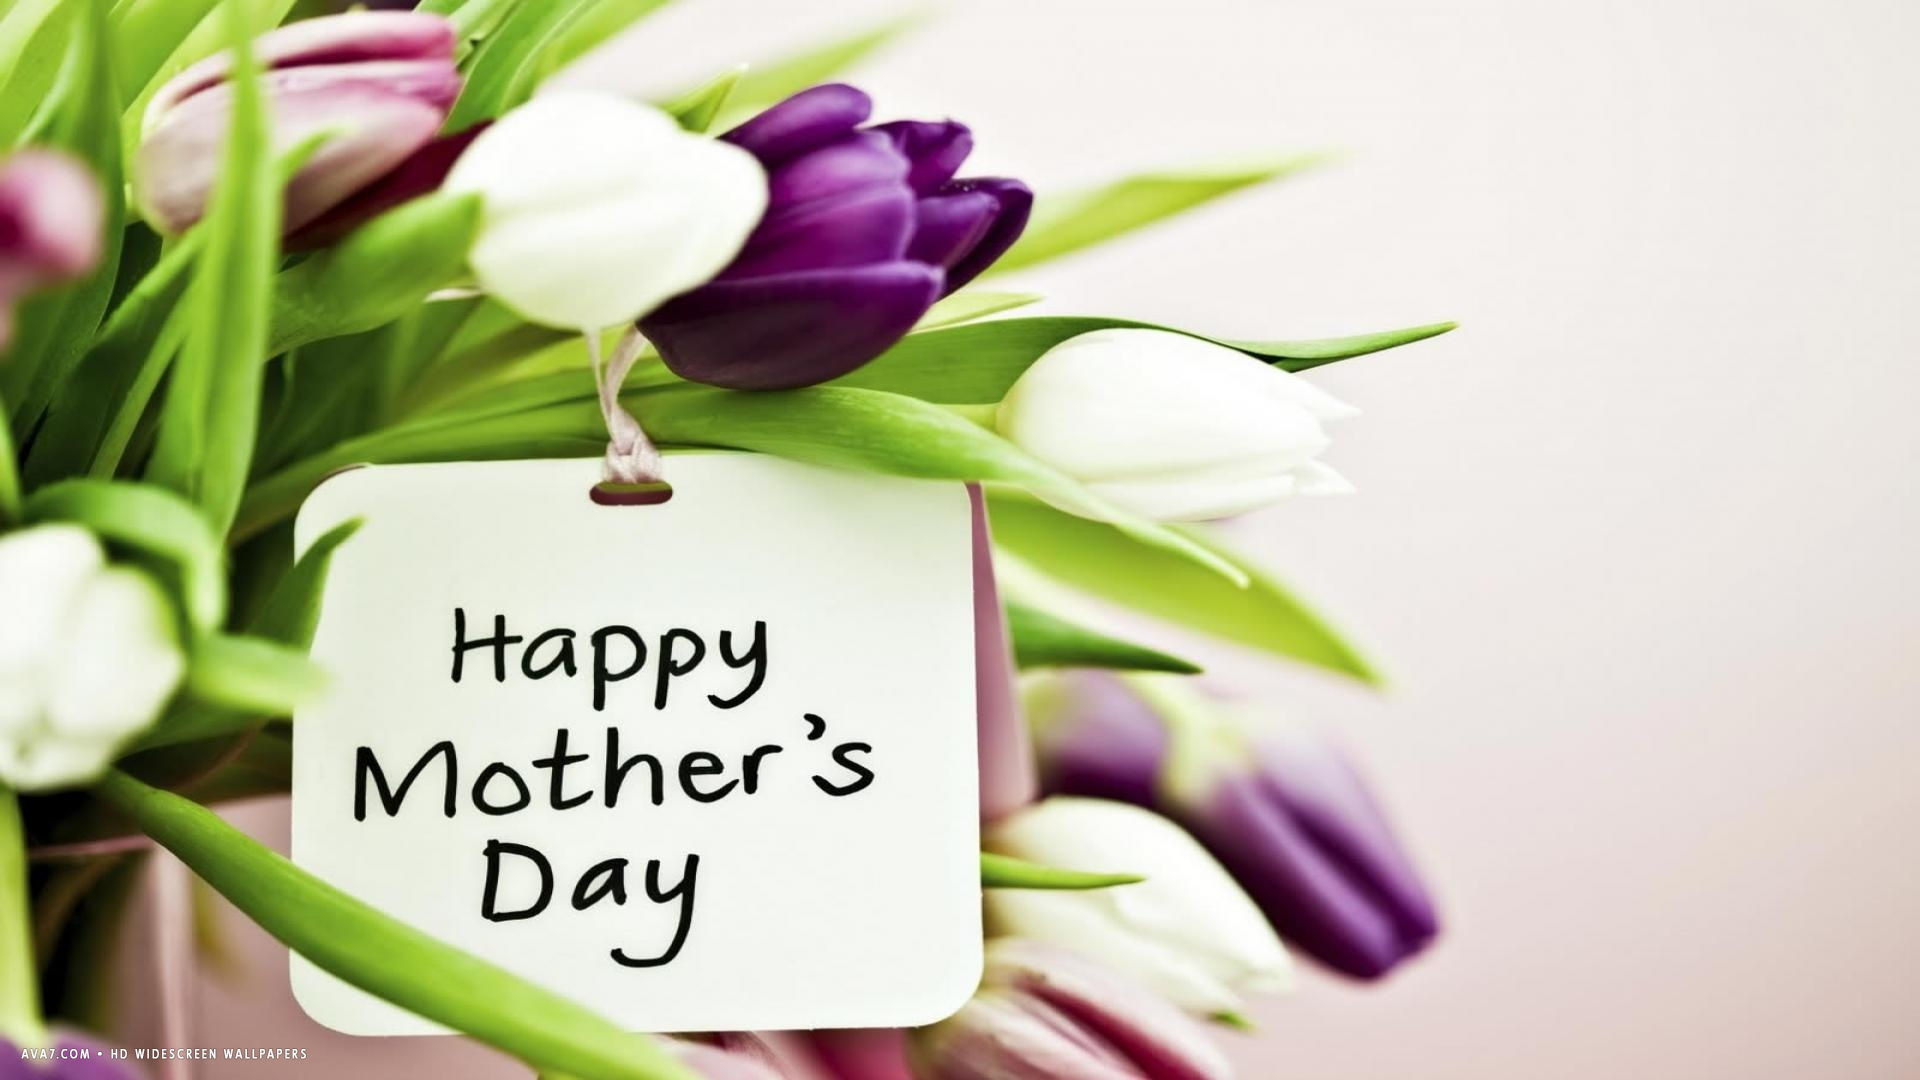 Happy Mothers Day Images Backgrounds and Wallpapers  Lalo